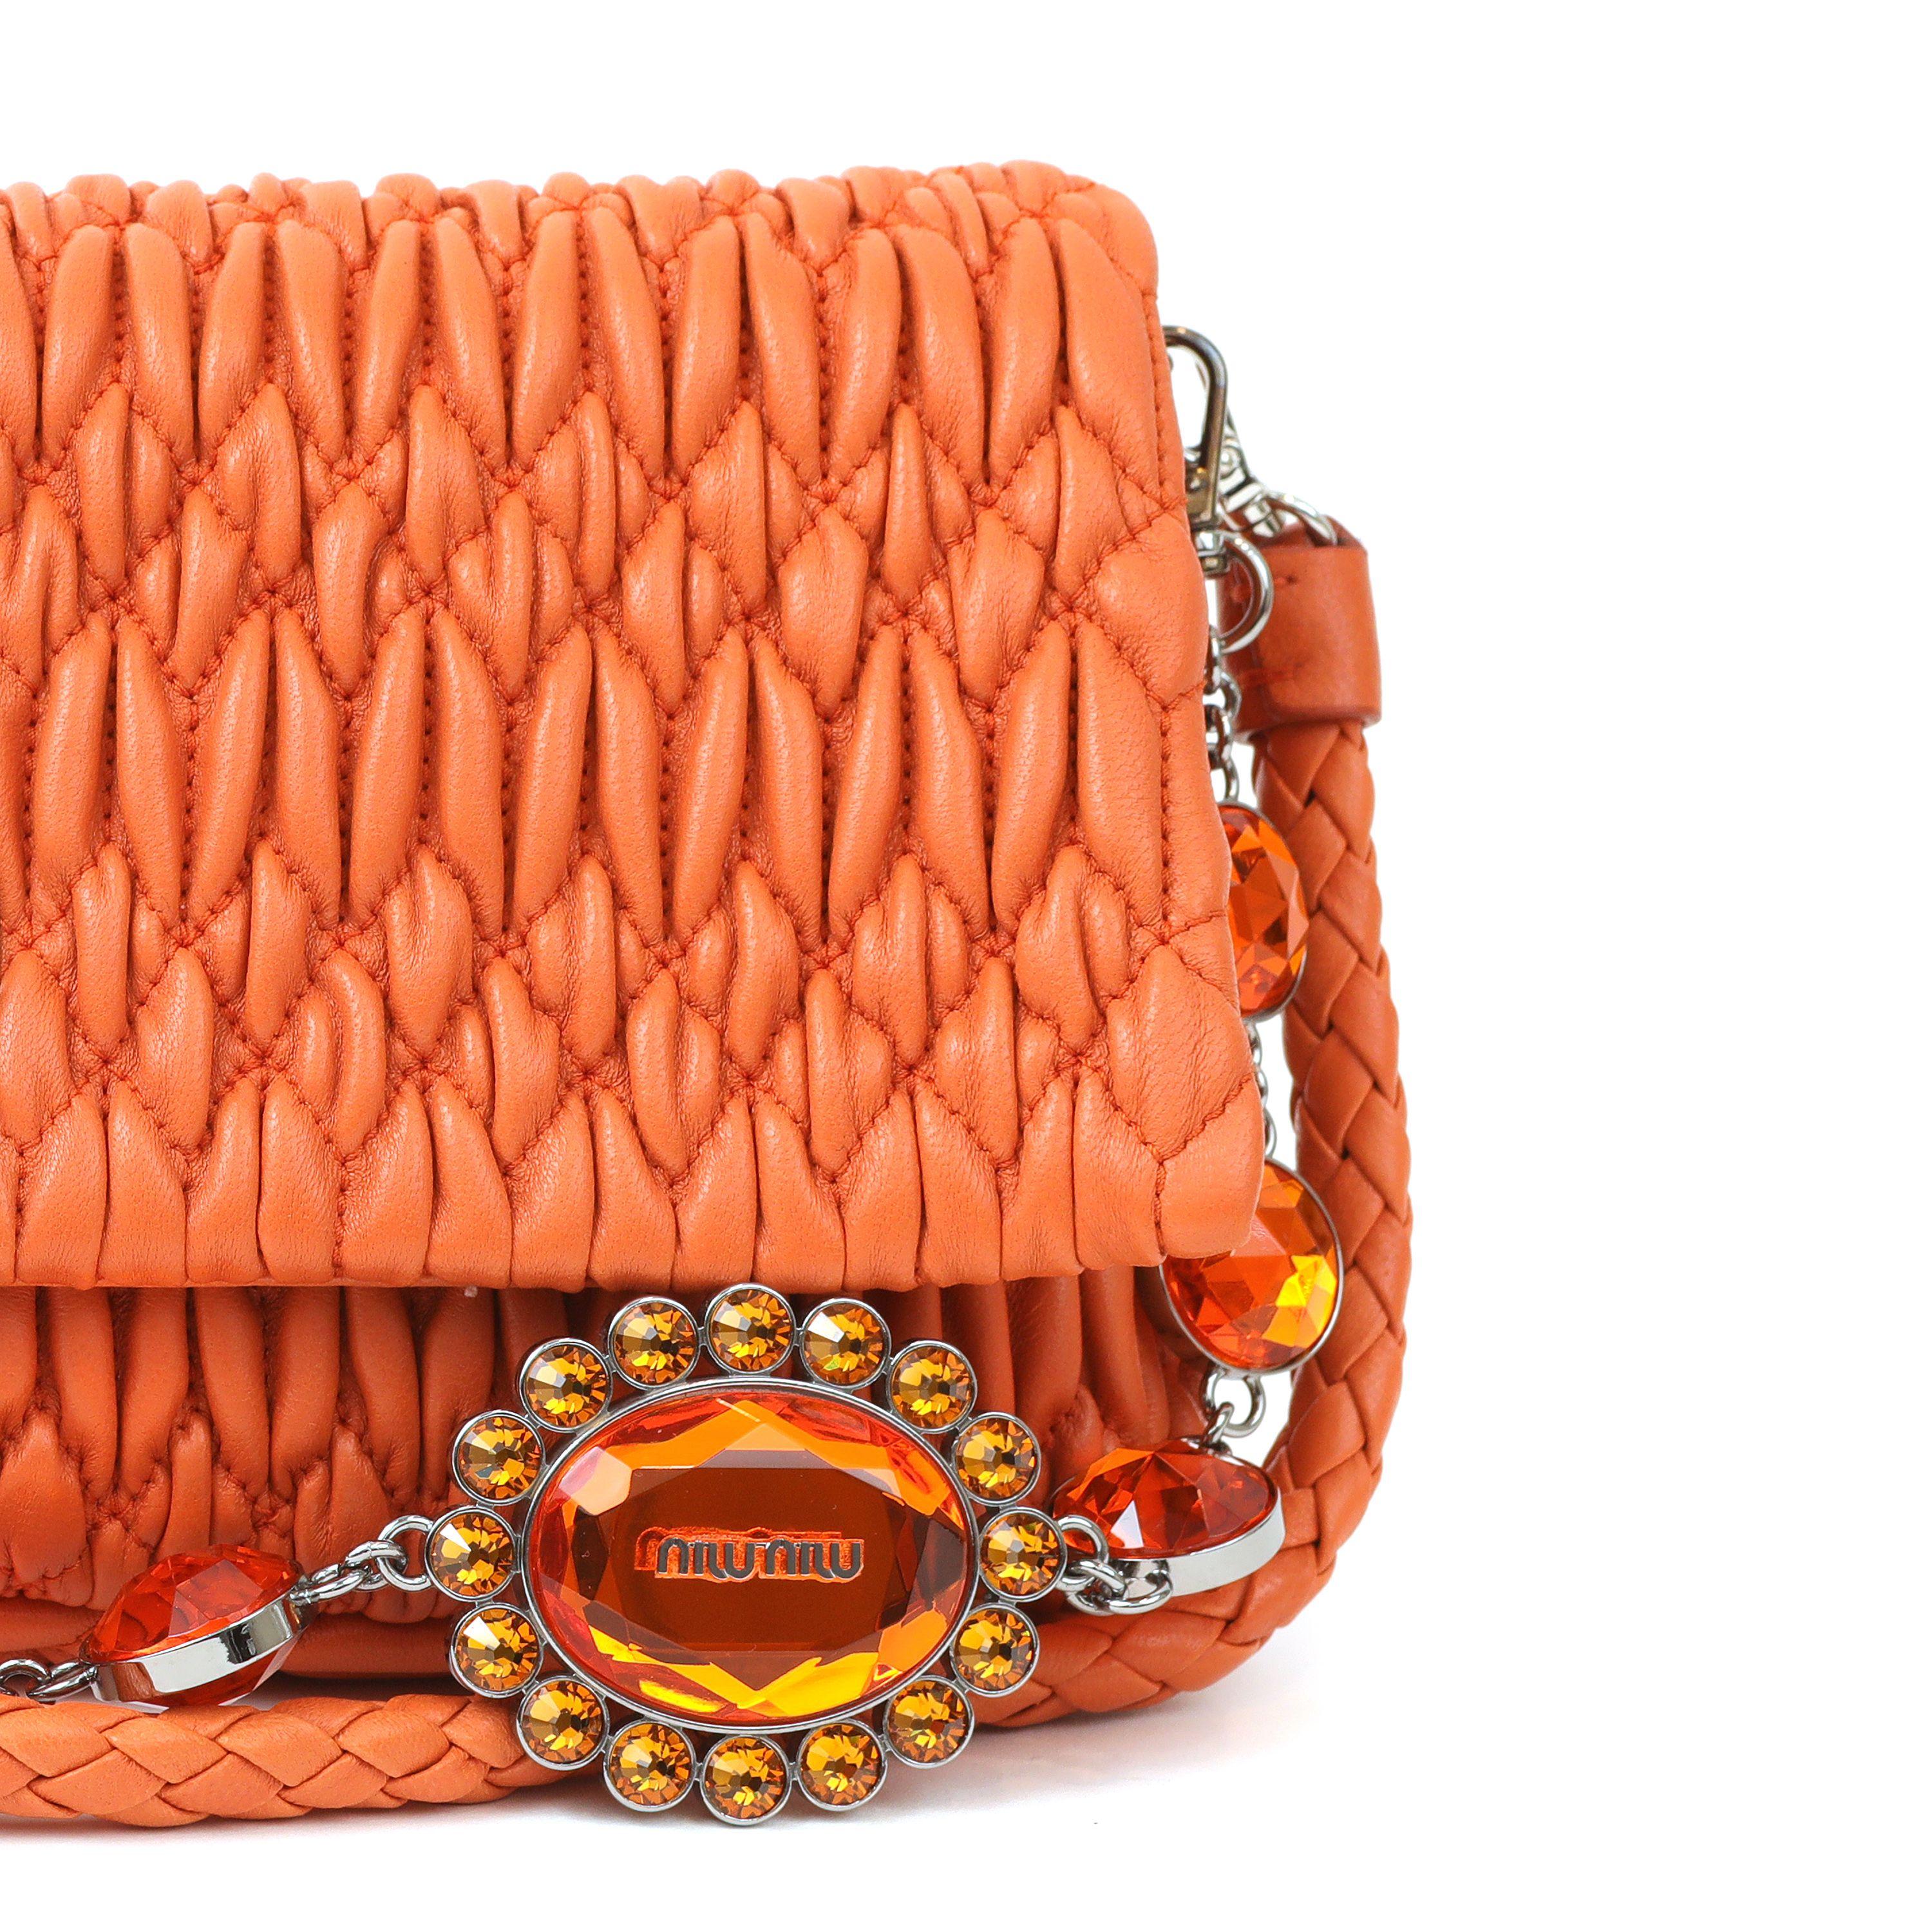 Miu Miu Orange Iconic Crystal Cloquè Small Bag with Silver Hardware In Excellent Condition For Sale In Palm Beach, FL